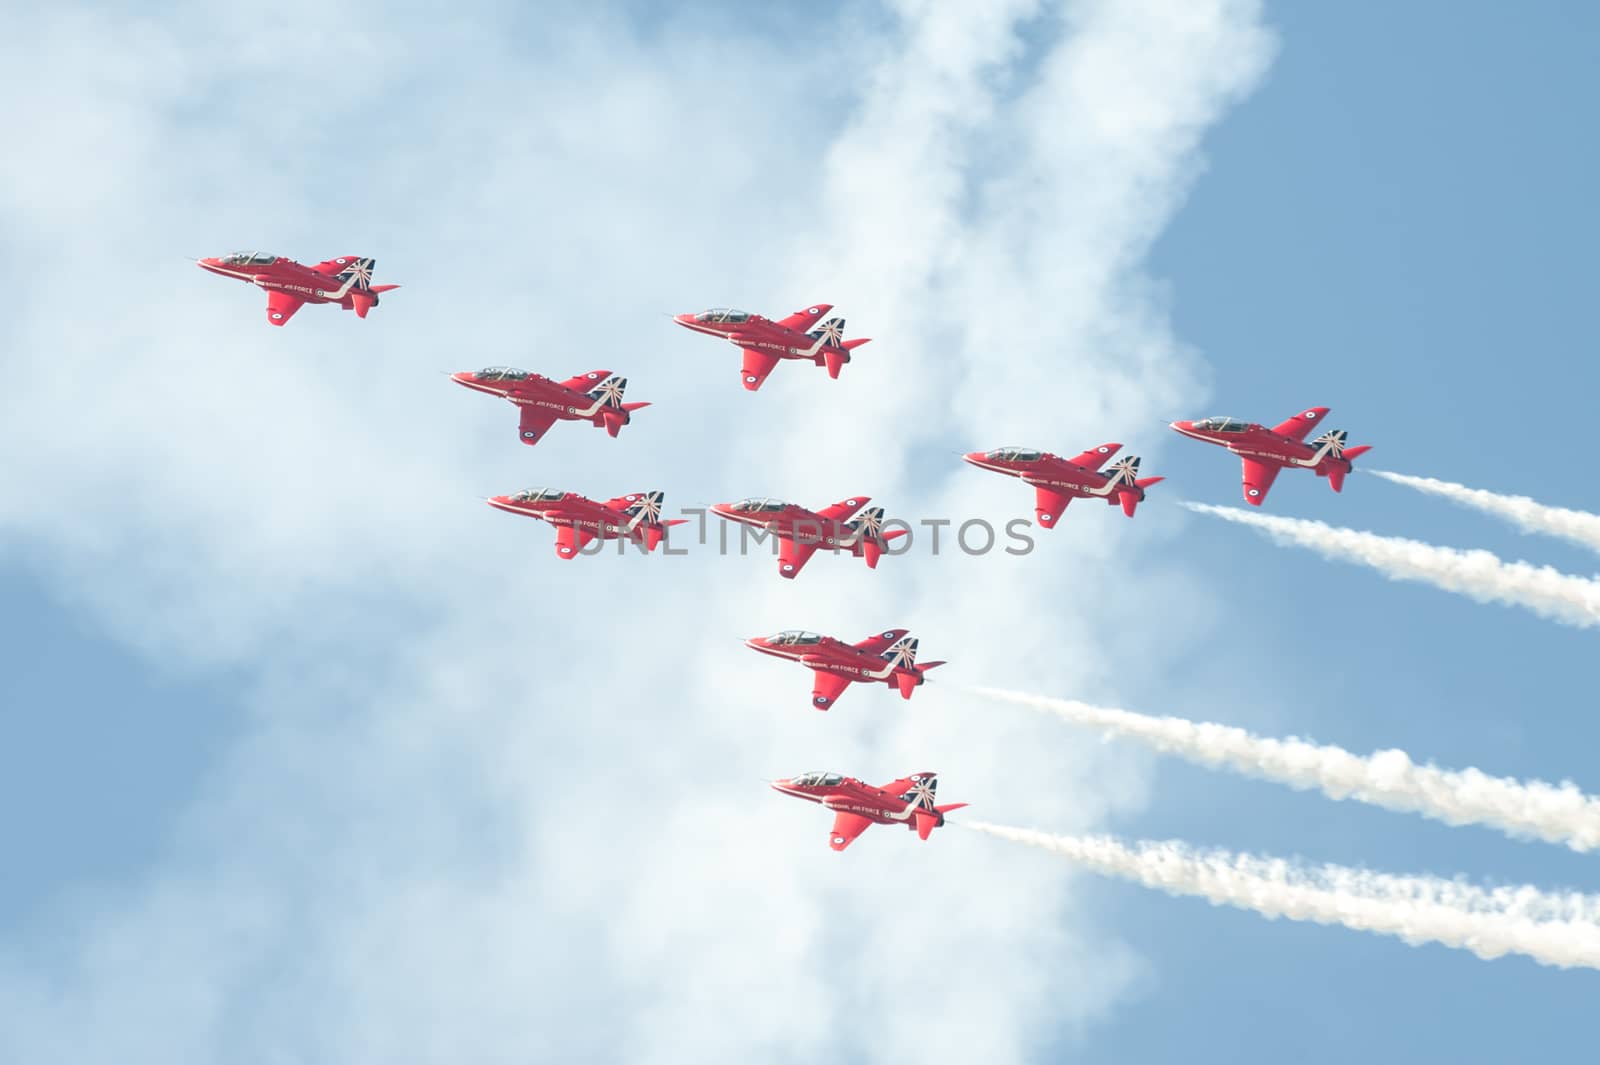 Farnborough, UK - July 18, 2014: The Red Arrows formation aerobatic display team leaving smoke trails in the sky over Farnborough, UK